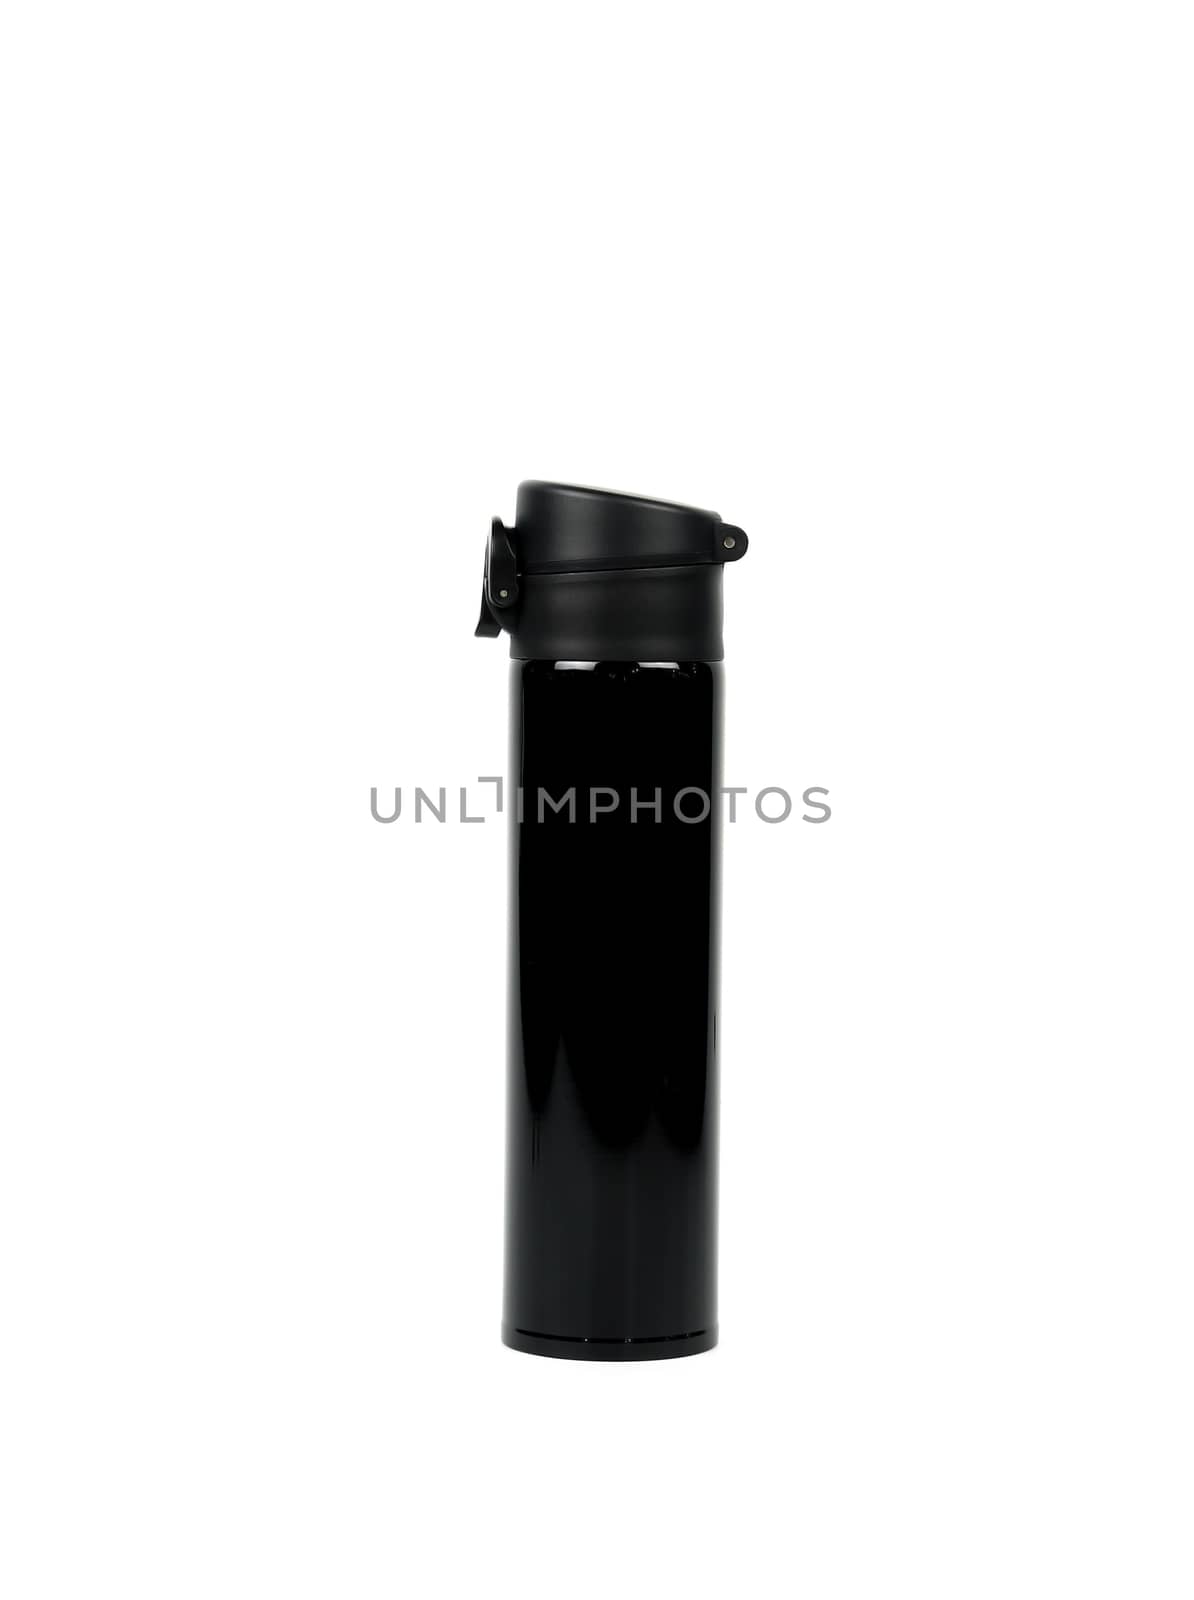 Black thermos bottle isolated on white background with copy space. Coffee and tea bottle container. by Fahroni